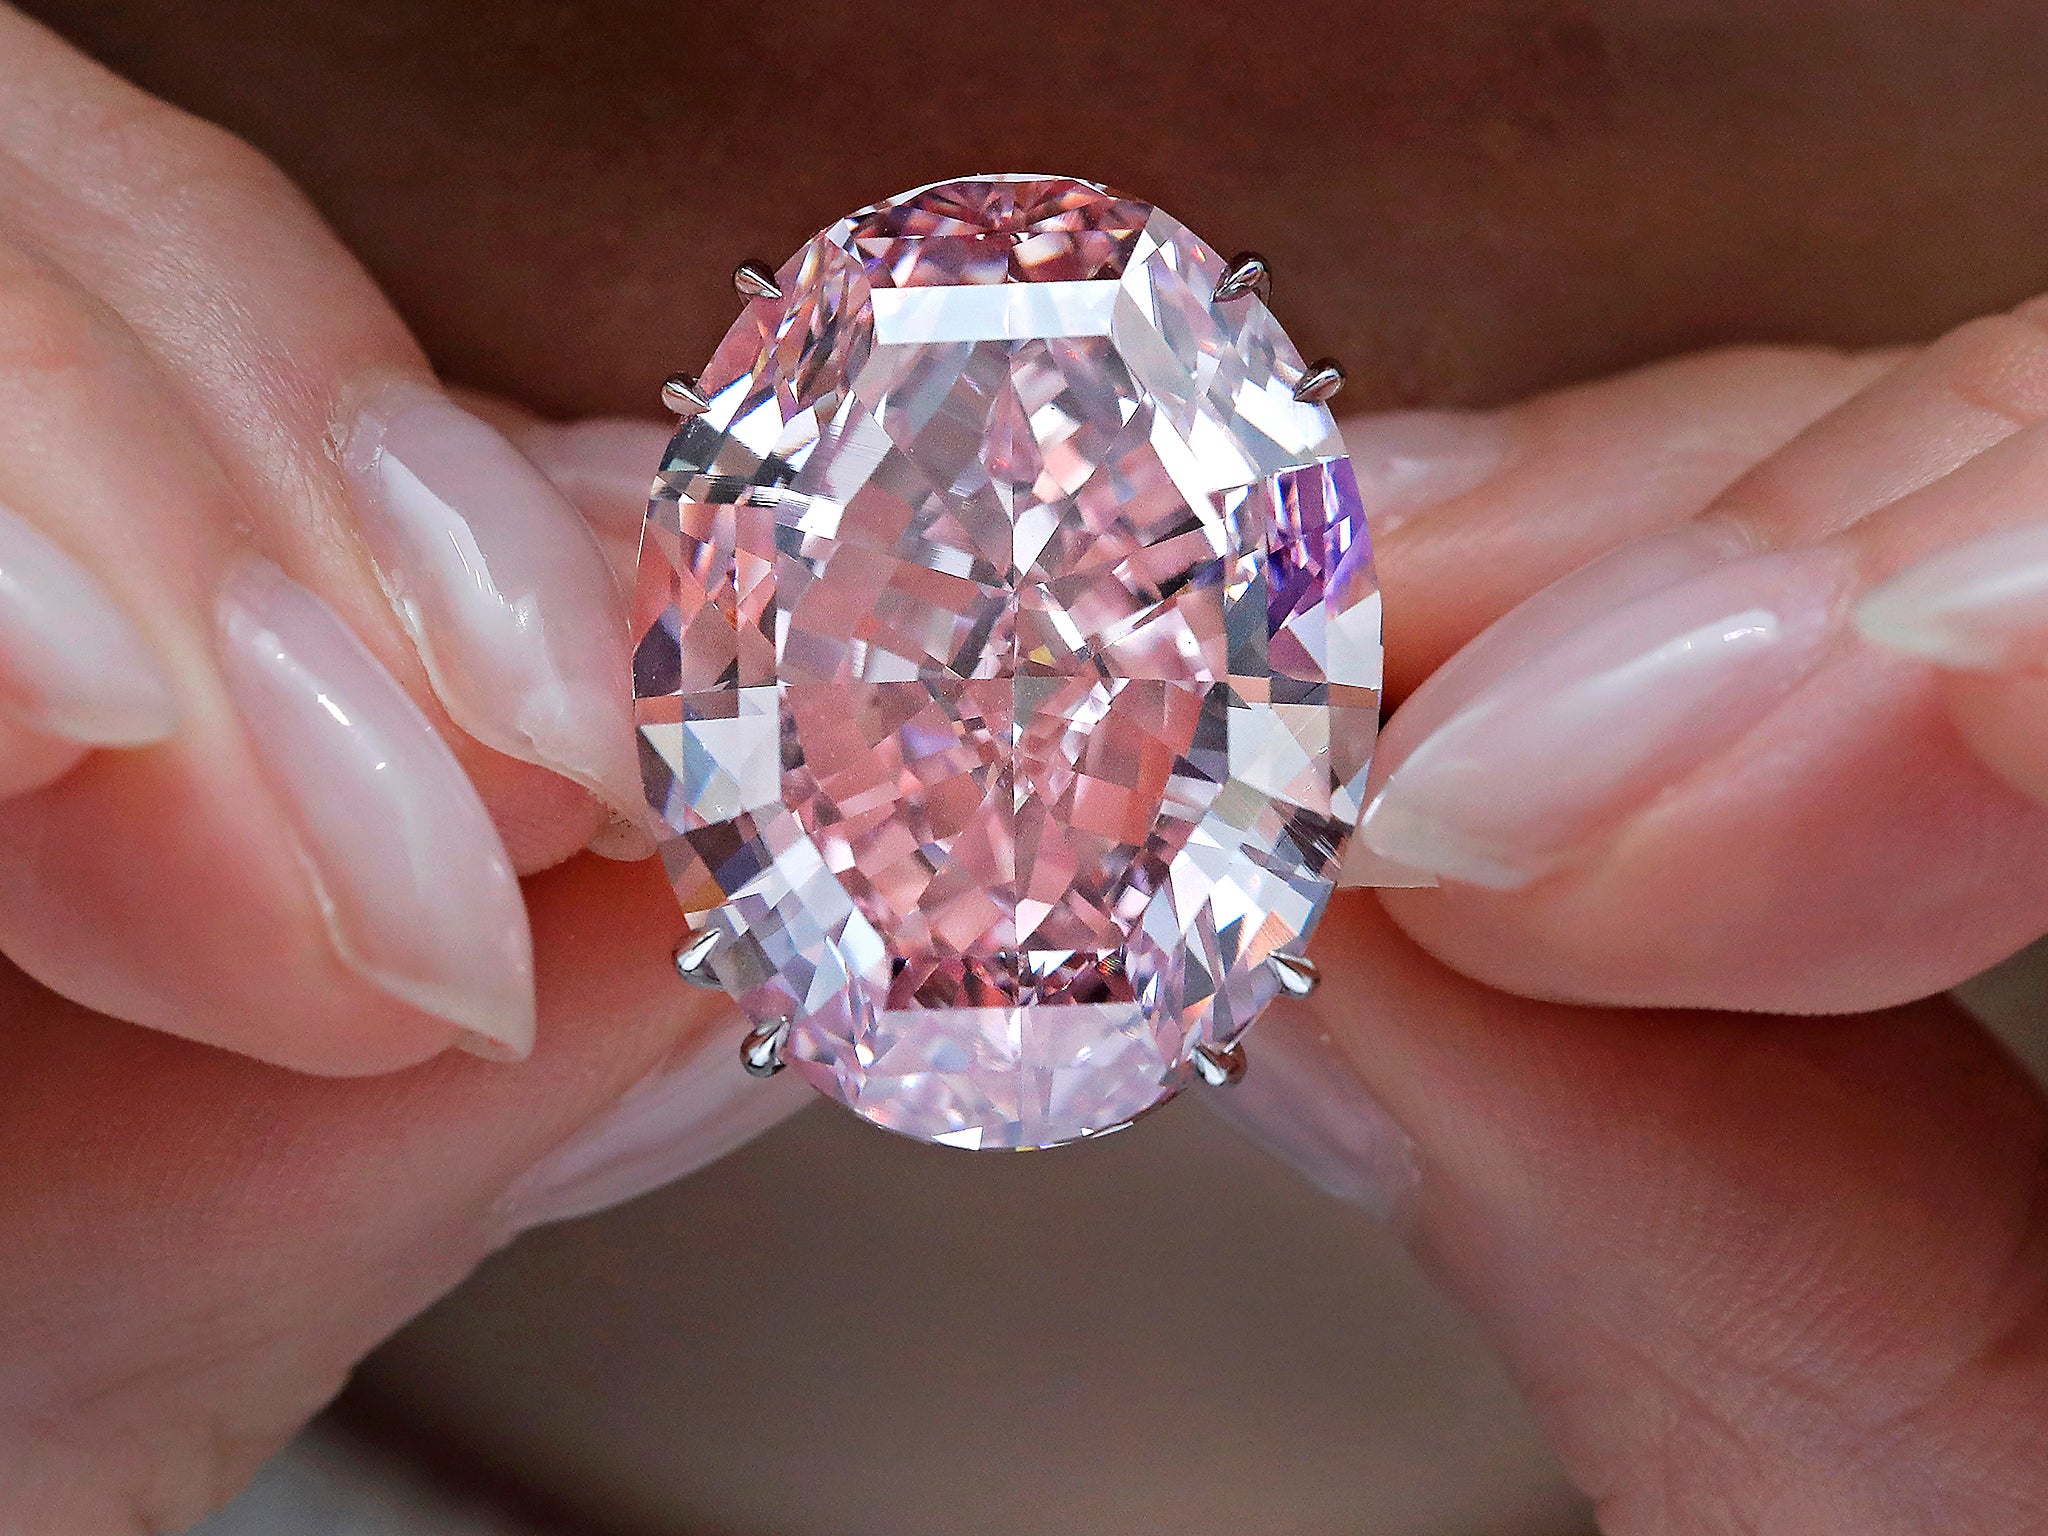 The Pink Star is the largest polished diamond in its class to go under the hammer